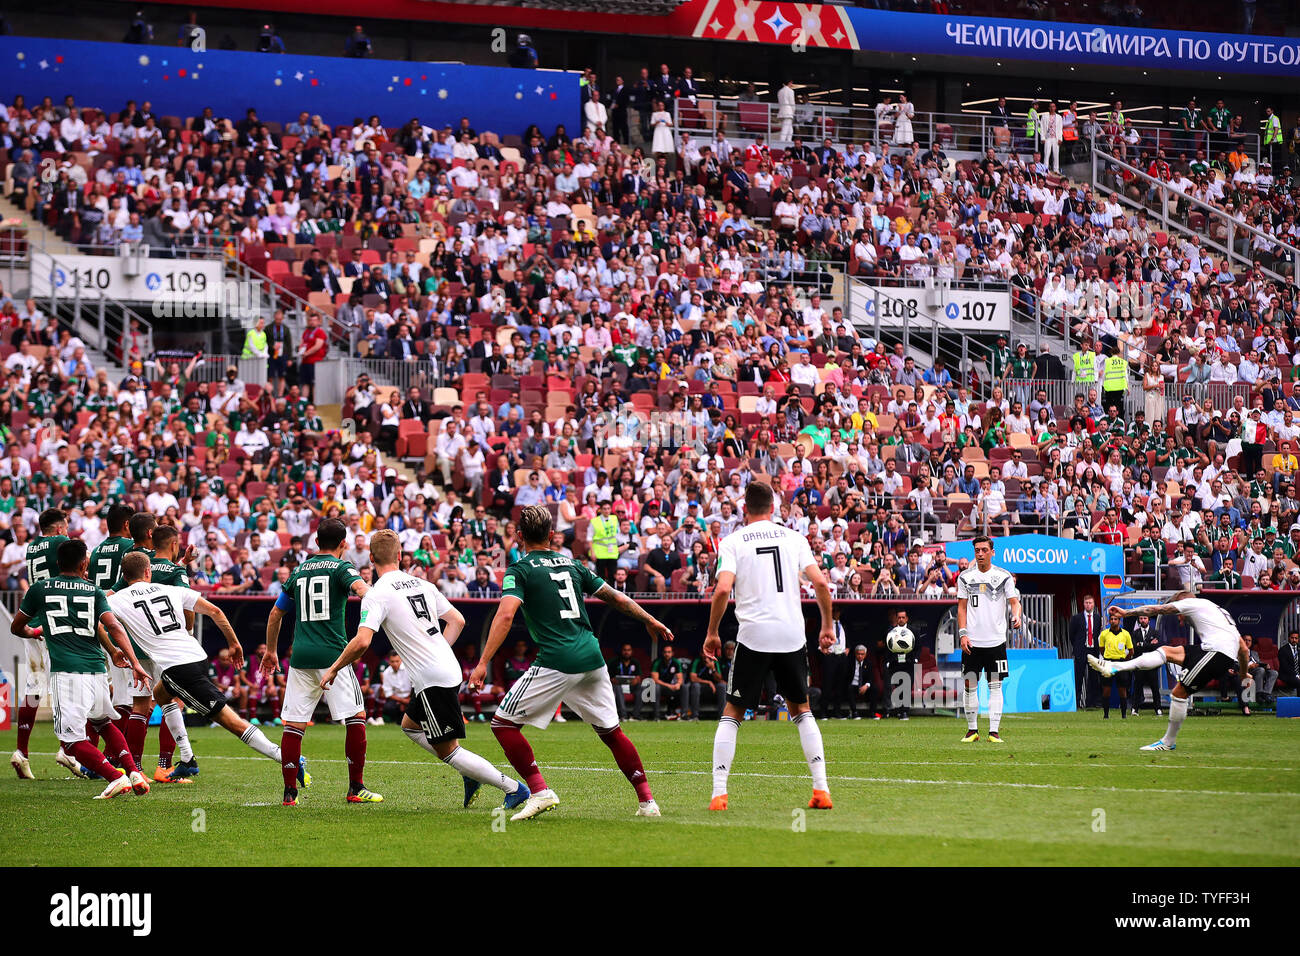 Toni Kroos of Germany shoots at goal during the 2018 FIFA World Cup Group F match at the Luzhniki Stadium in Moscow, Russia on June 17, 2018. Photo by Chris Brunskill/UPI Stock Photo